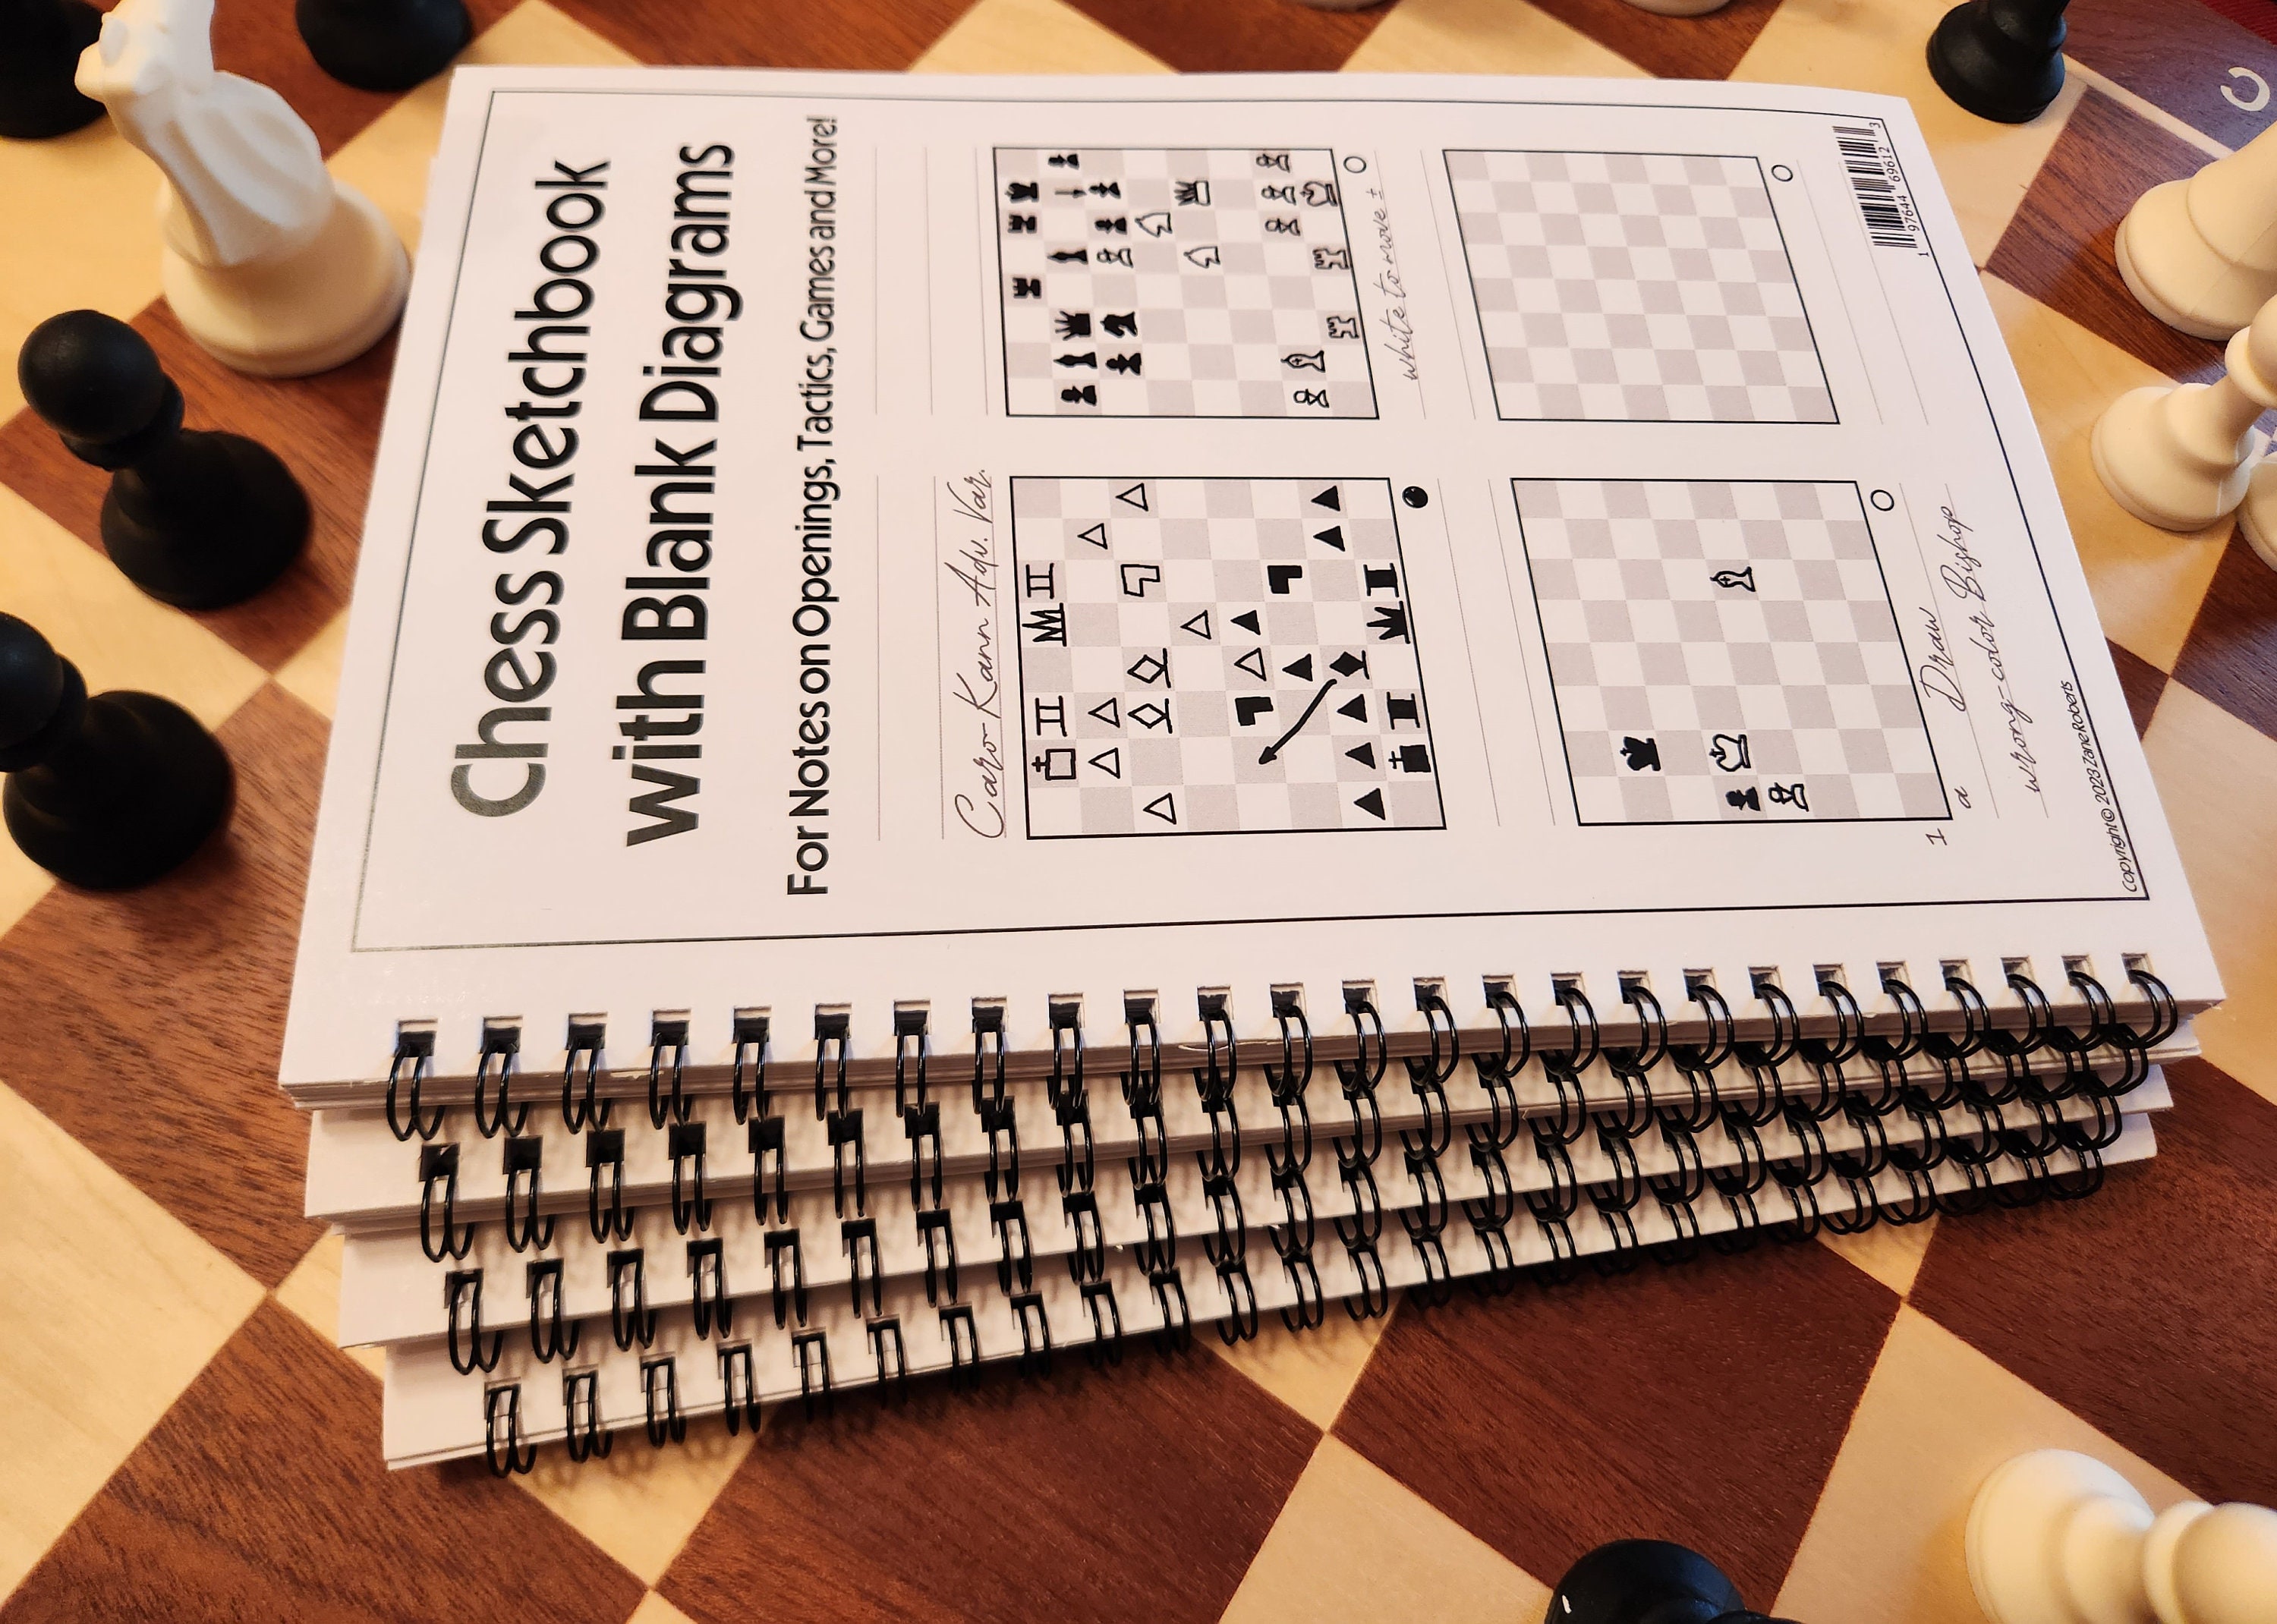 Chess board and pieces sketch hardcover journal - Chess Boutique